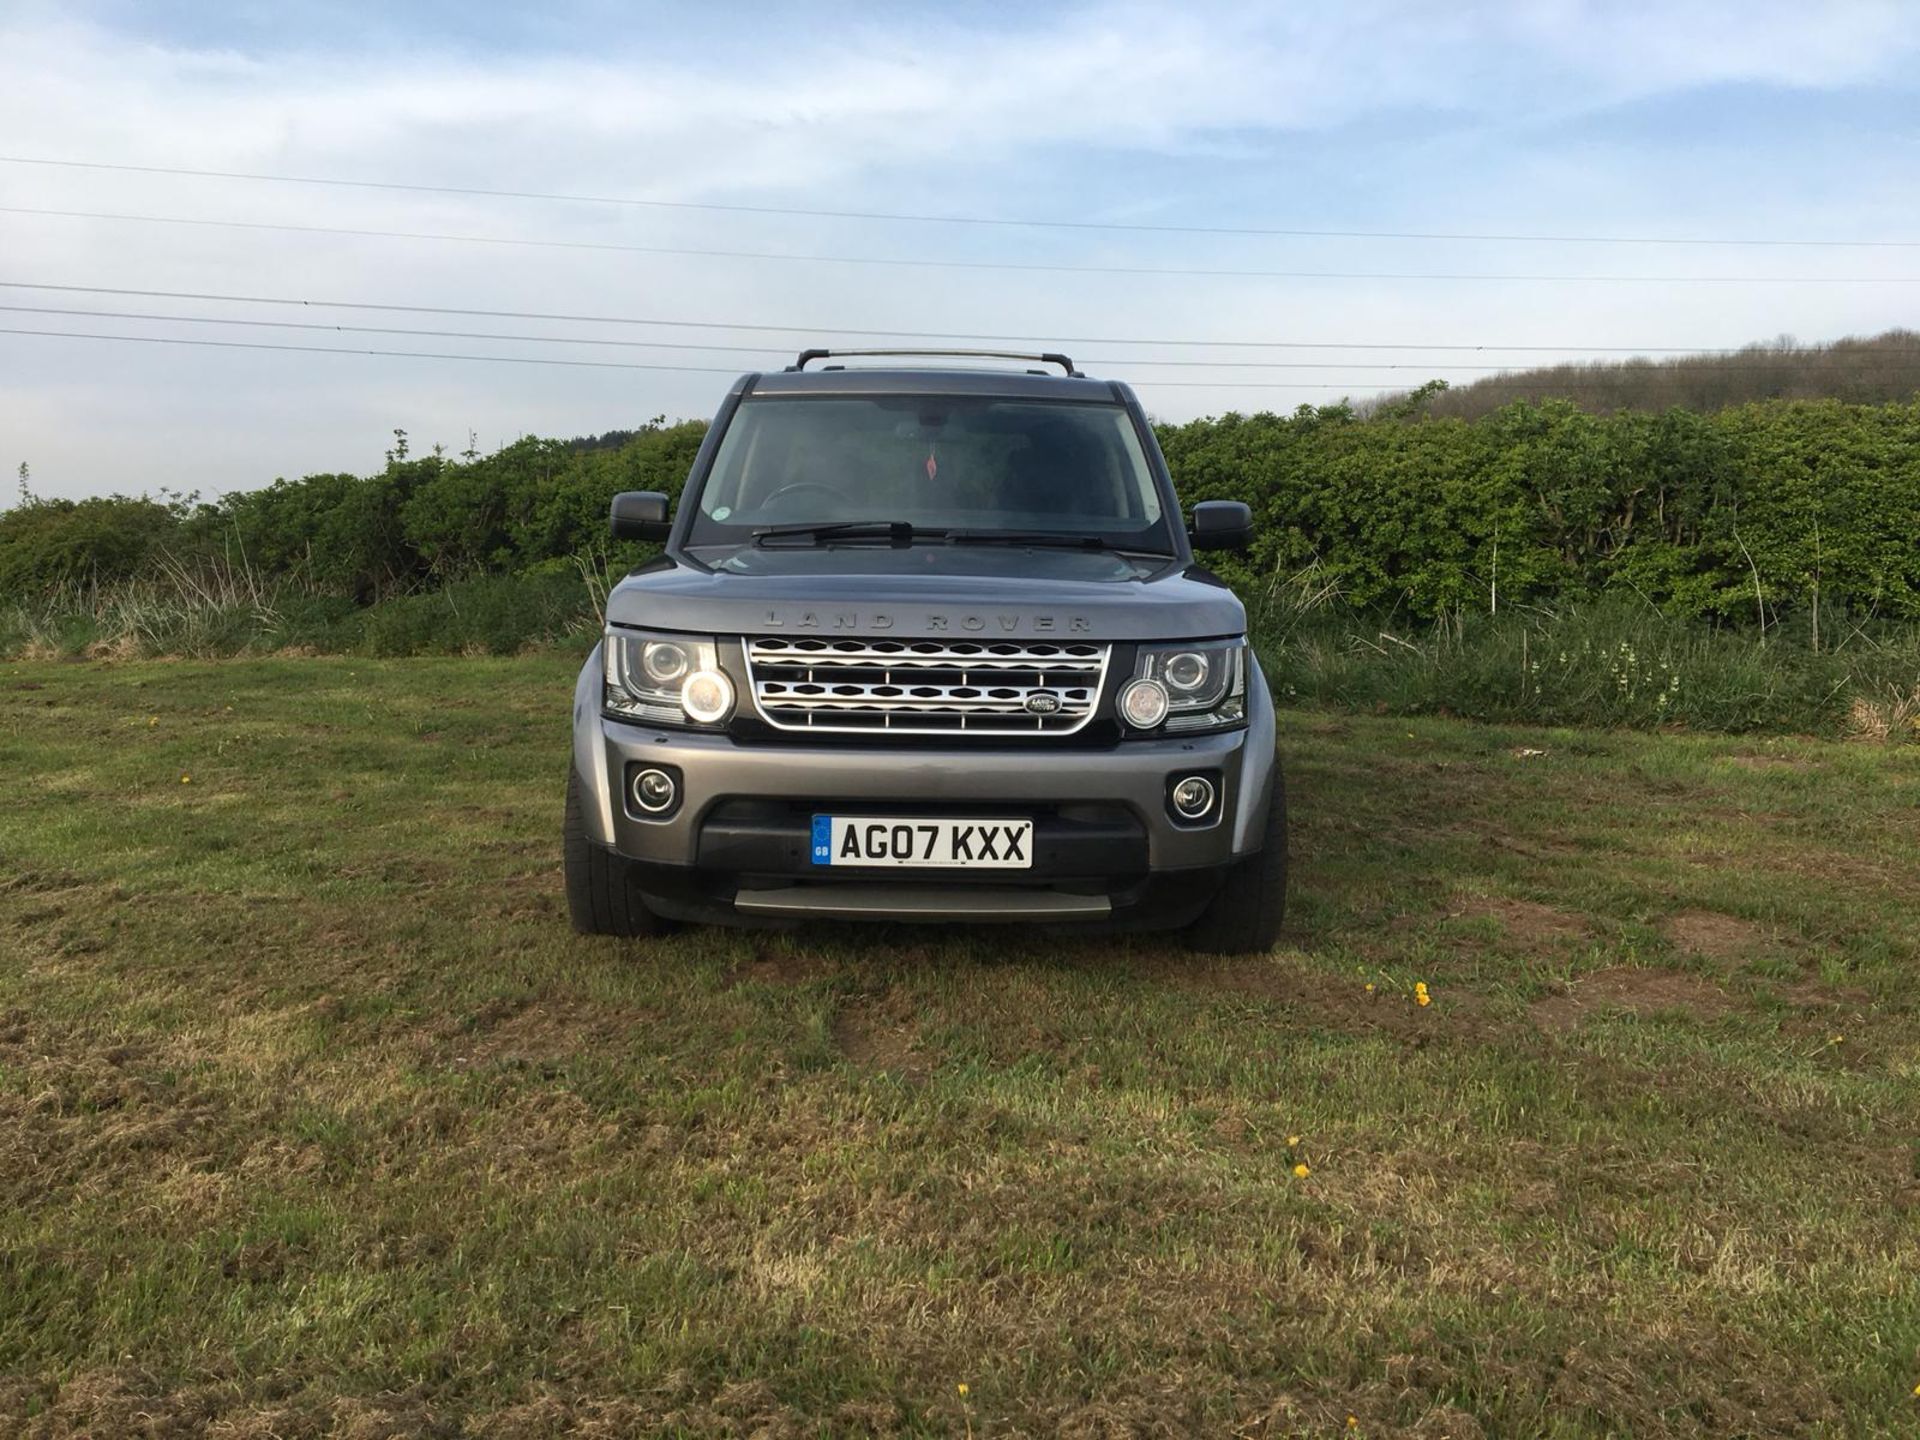 2007/07 REG LAND ROVER DISCOVERY 3 TDV6 SE AUTOMATIC 2.7 DIESEL 4X4, 7 SEAT FACELIFT LIGHTS *NO VAT* - Image 3 of 16